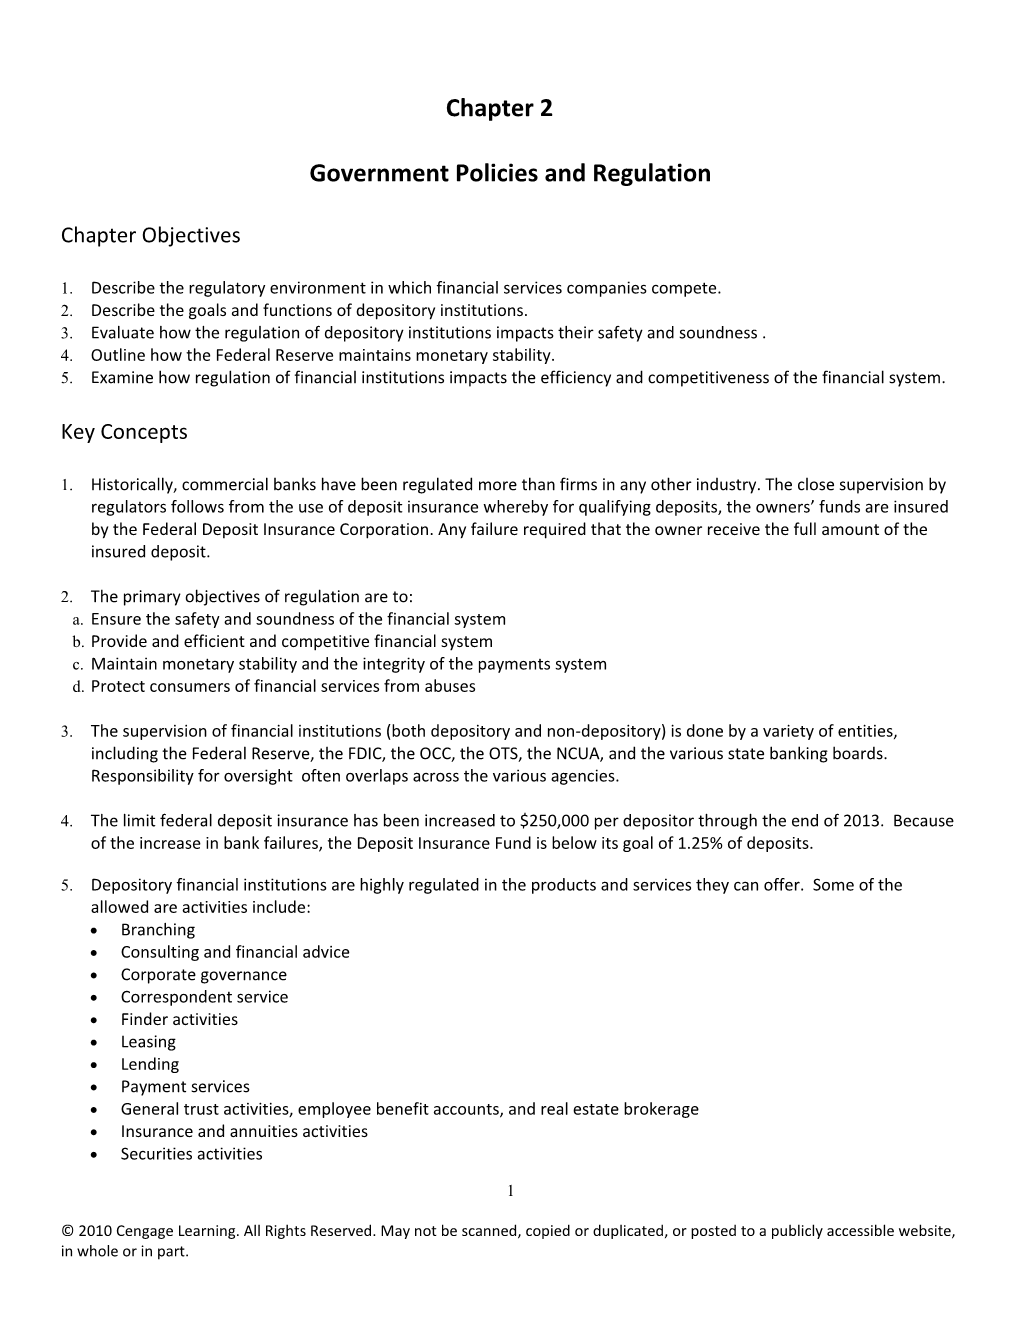 Government Policies and Regulation